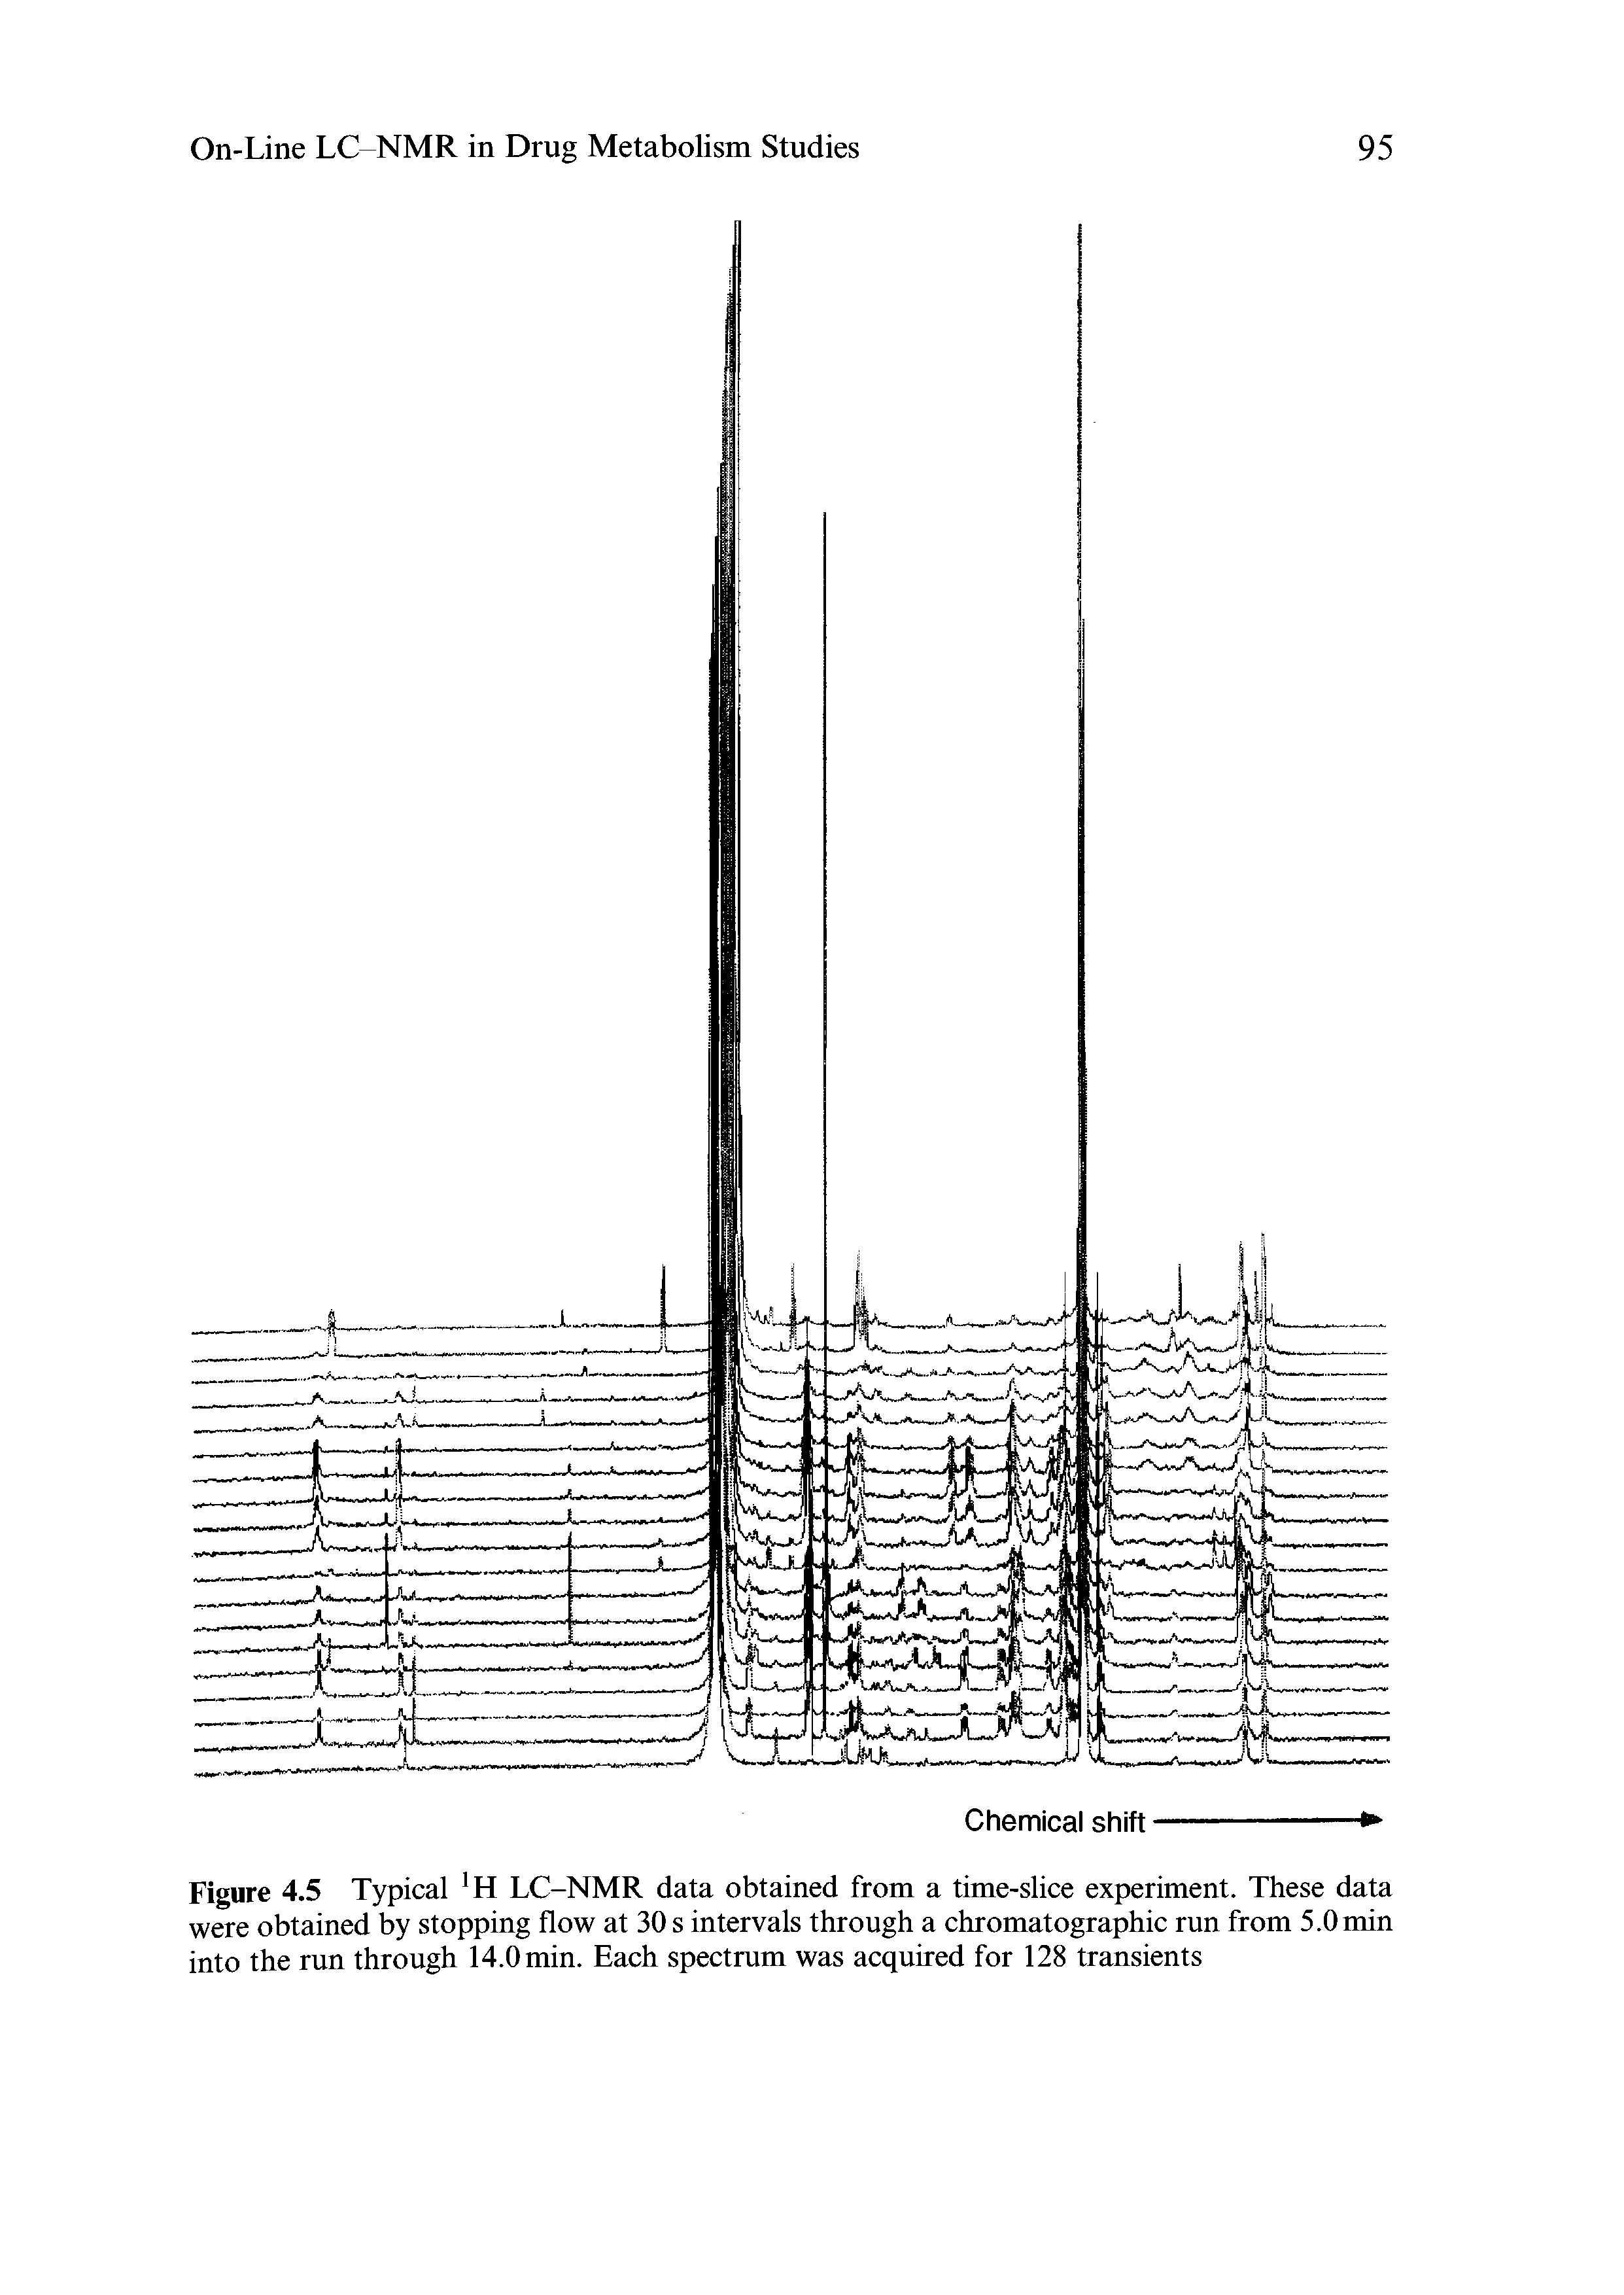 Figure 4.5 Typical H LC-NMR data obtained from a time-slice experiment. These data were obtained by stopping flow at 30 s intervals through a chromatographic run from 5.0min into the run through 14.0 min. Each spectrum was acquired for 128 transients...